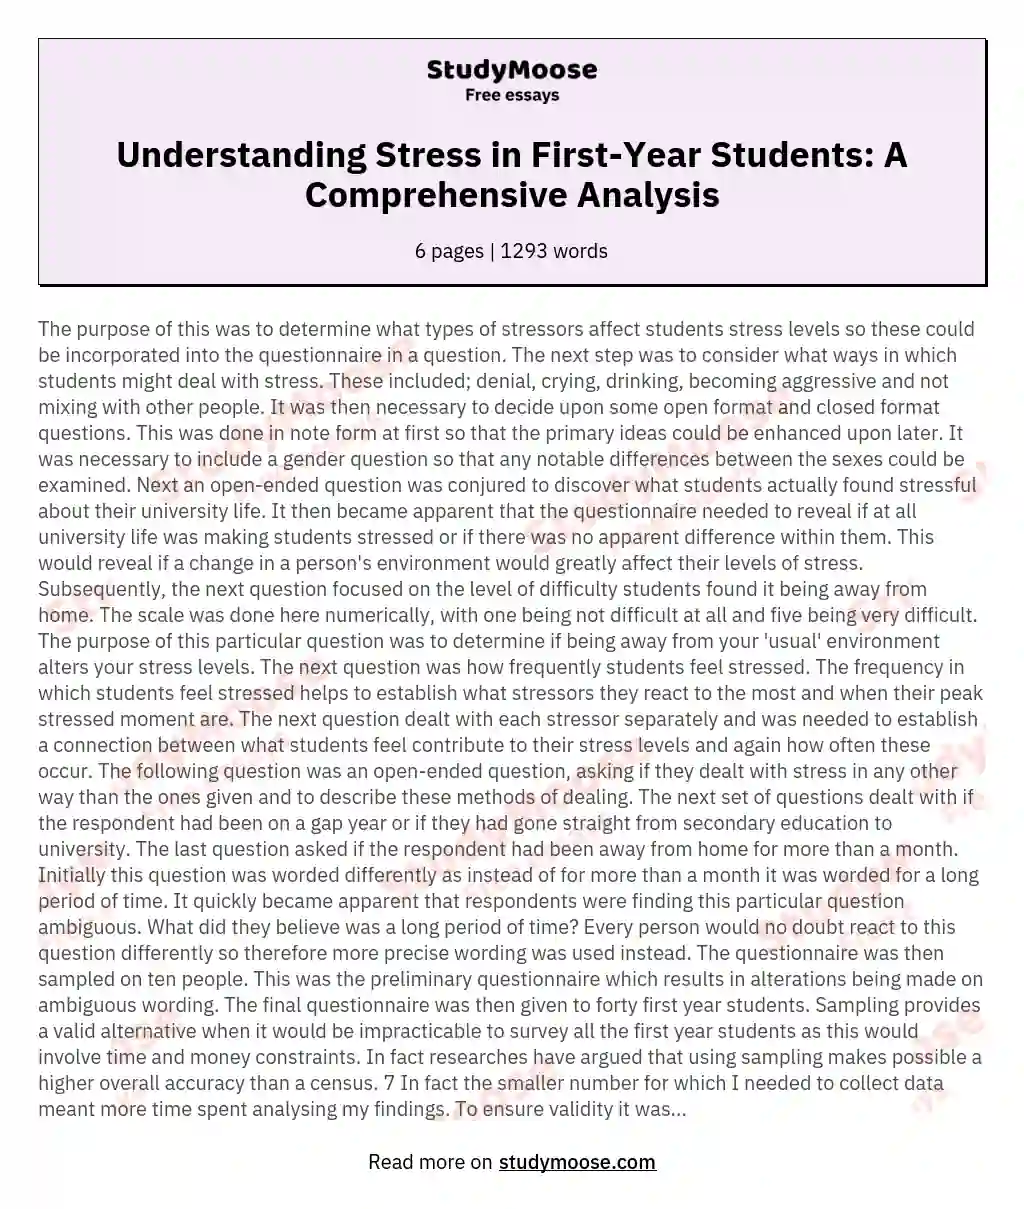 Understanding Stress in First-Year Students: A Comprehensive Analysis essay